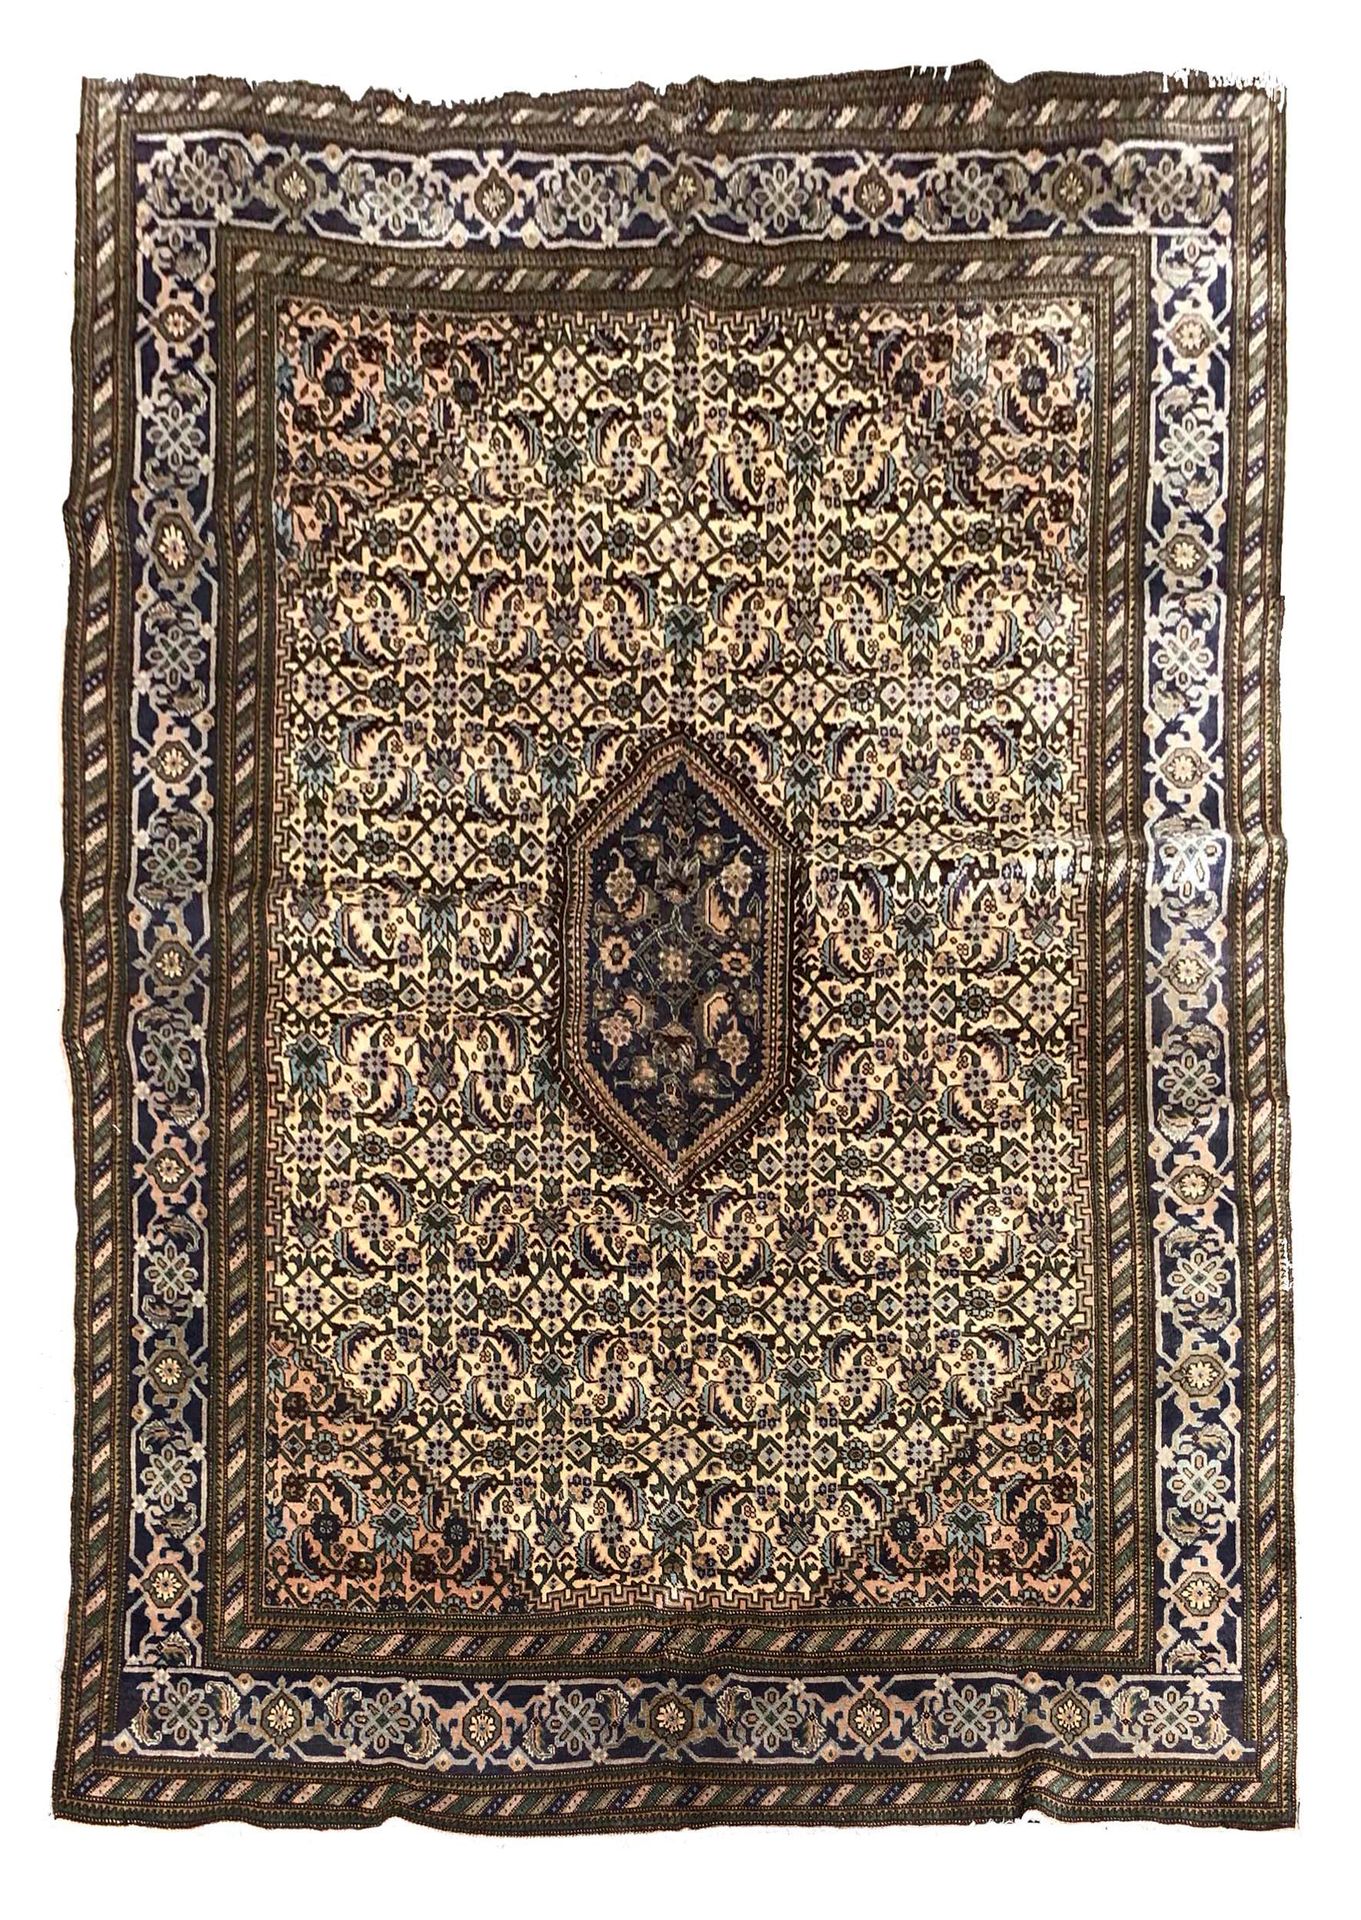 Null MÉCHKINE carpet (Iran), middle of the 20th century

Dimensions : 311 x 228c&hellip;